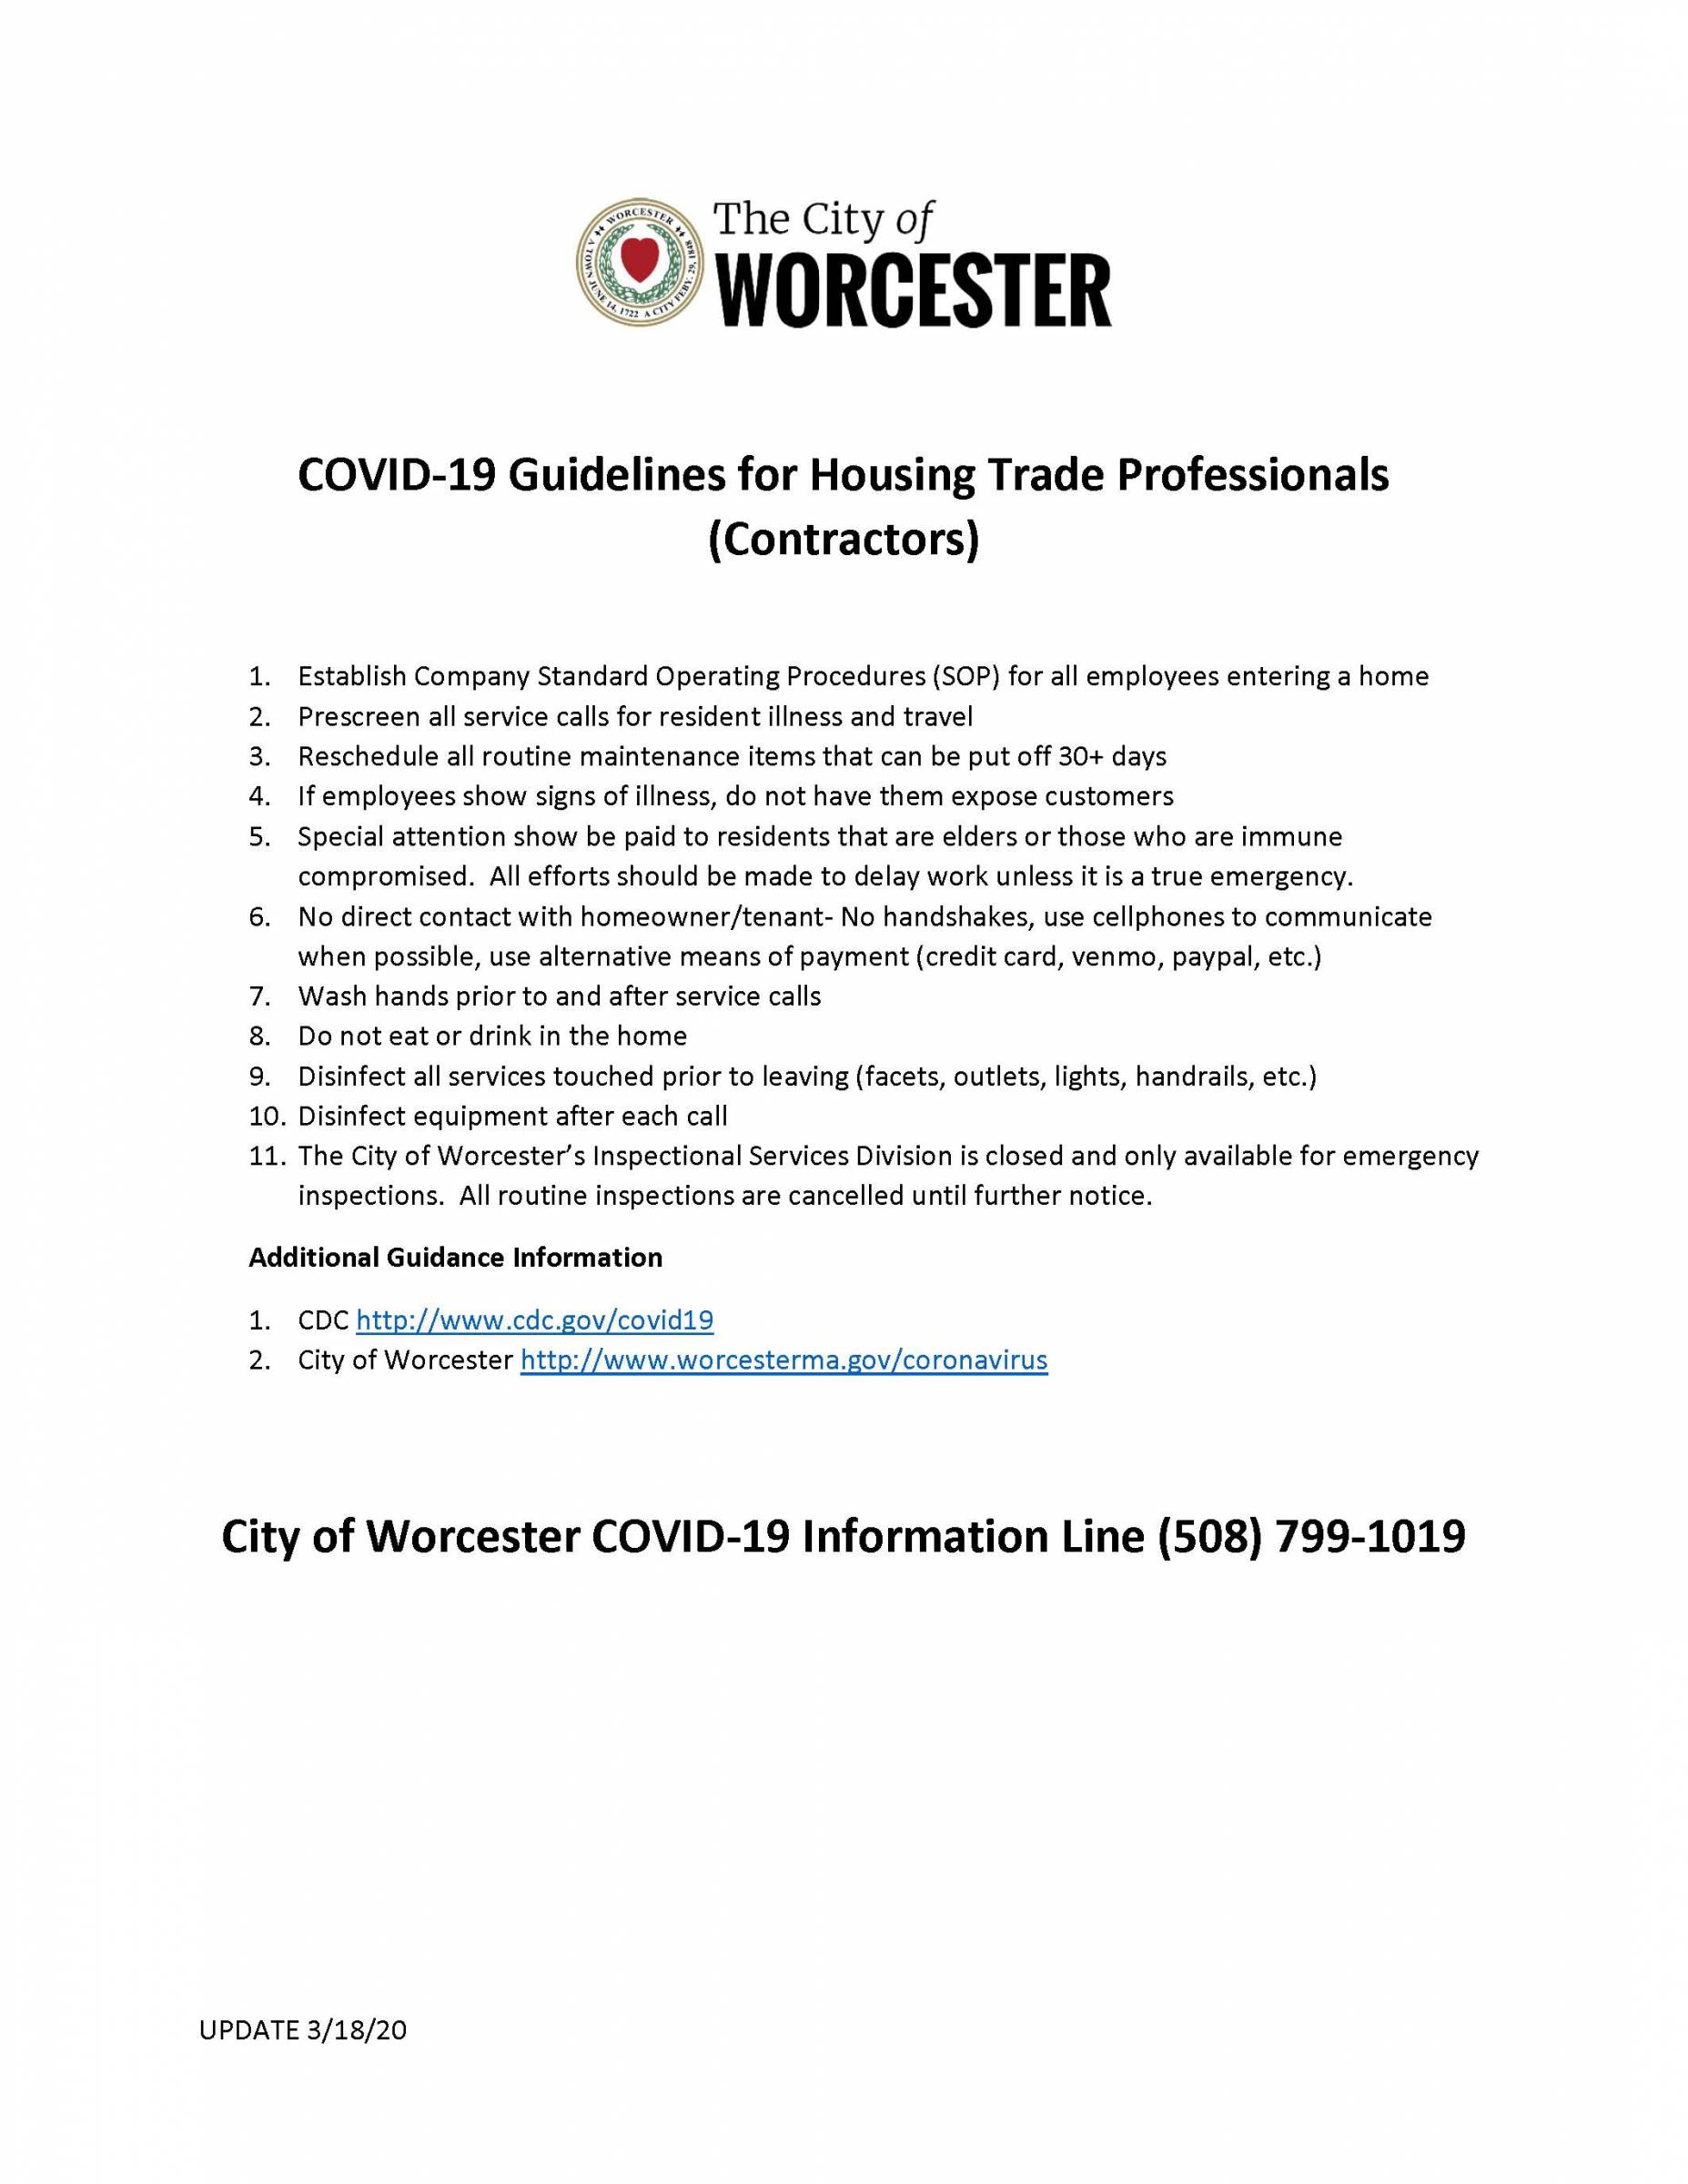 City of Worcester: COVID-19 Guidelines for Housing Trade Professionals (Contractors)